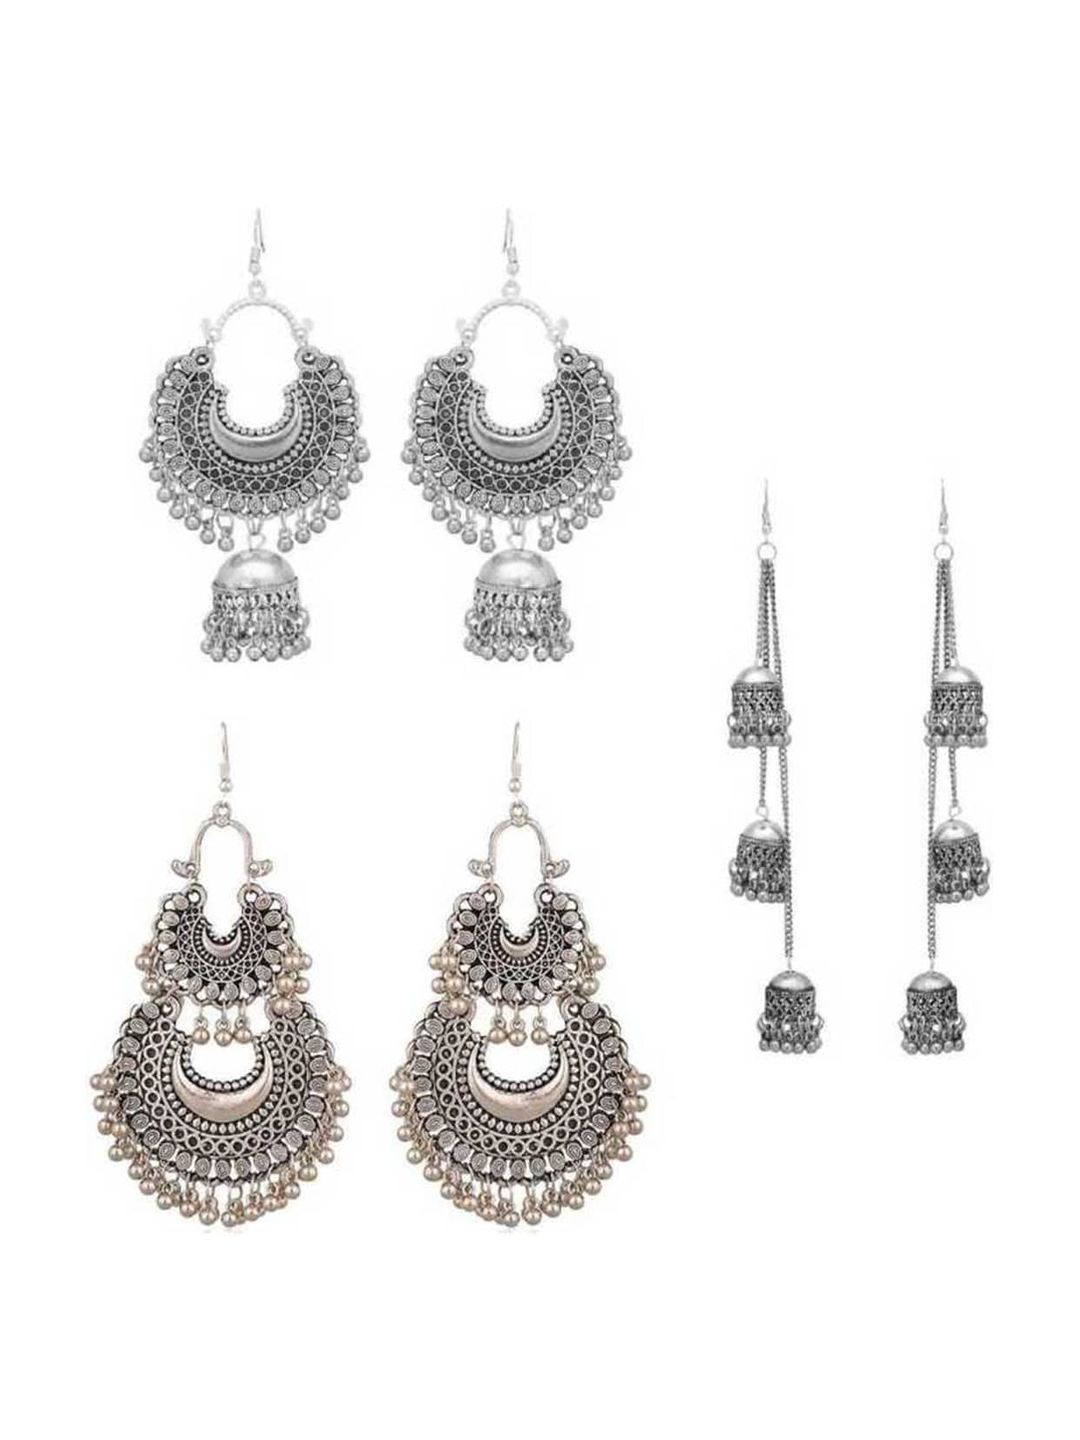 Vembley Set Of 3 Silver-Plated Earrings Price in India